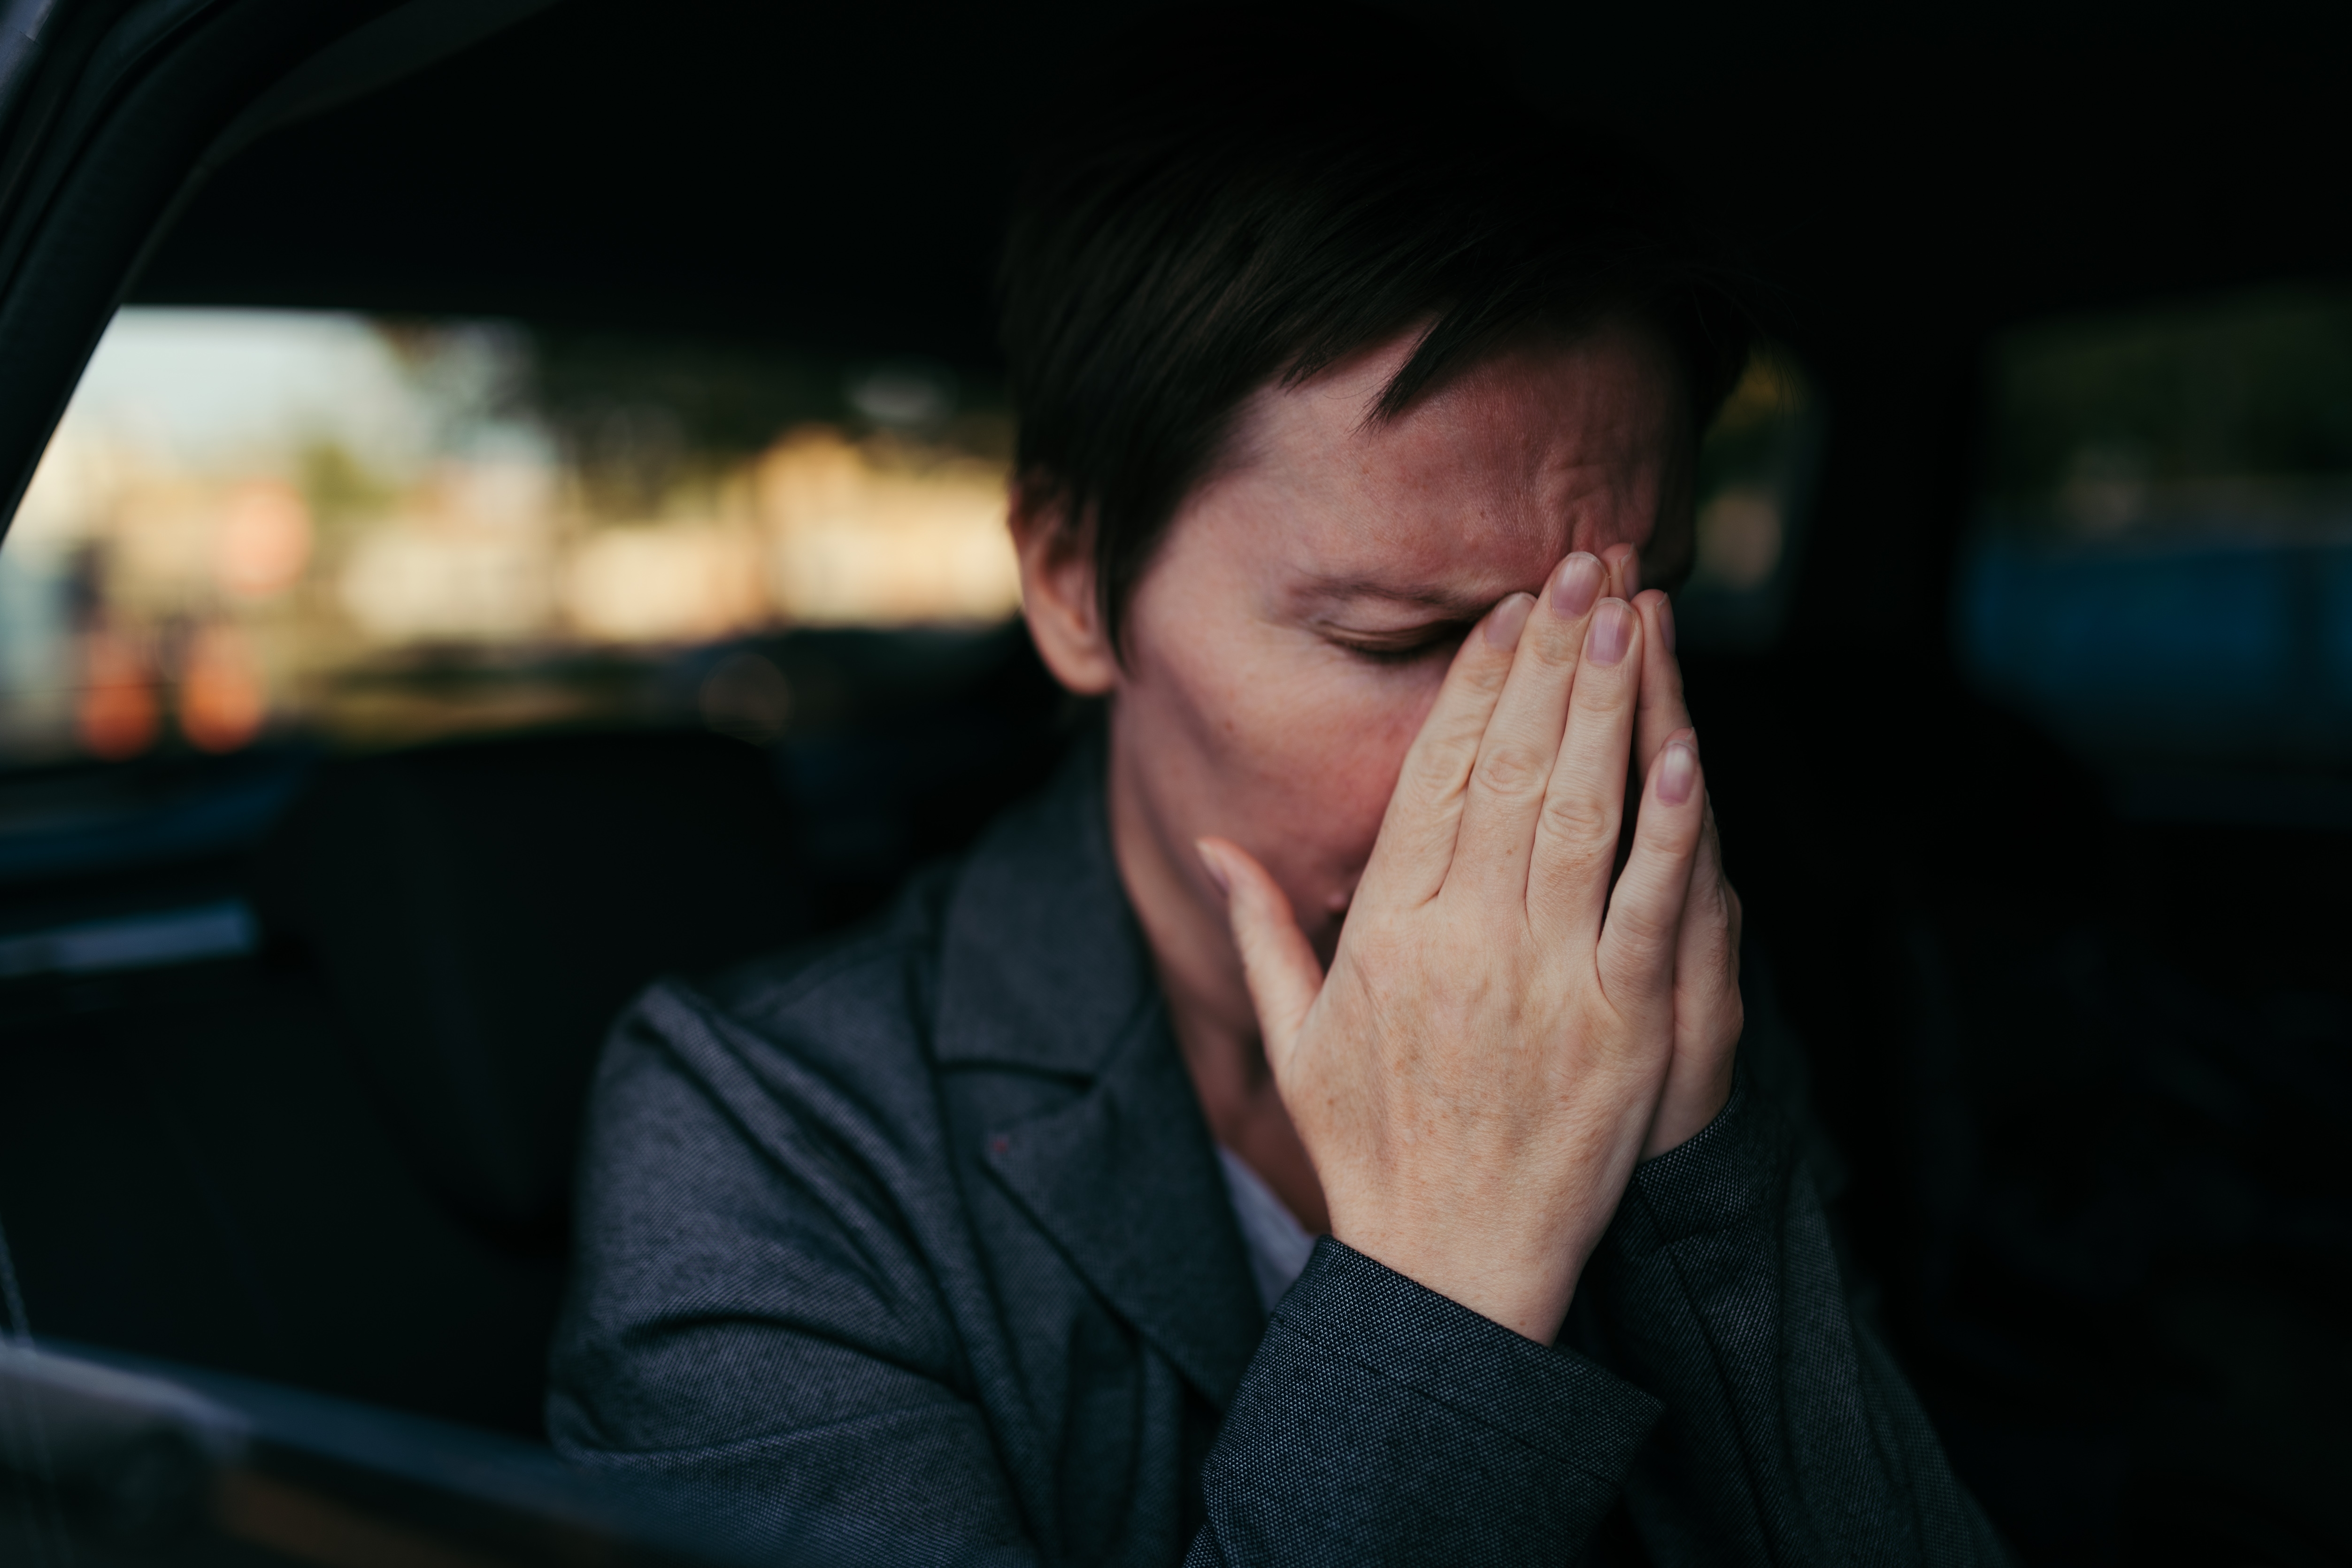 Anxious woman sitting in the back of a car | Source: Shutterstock